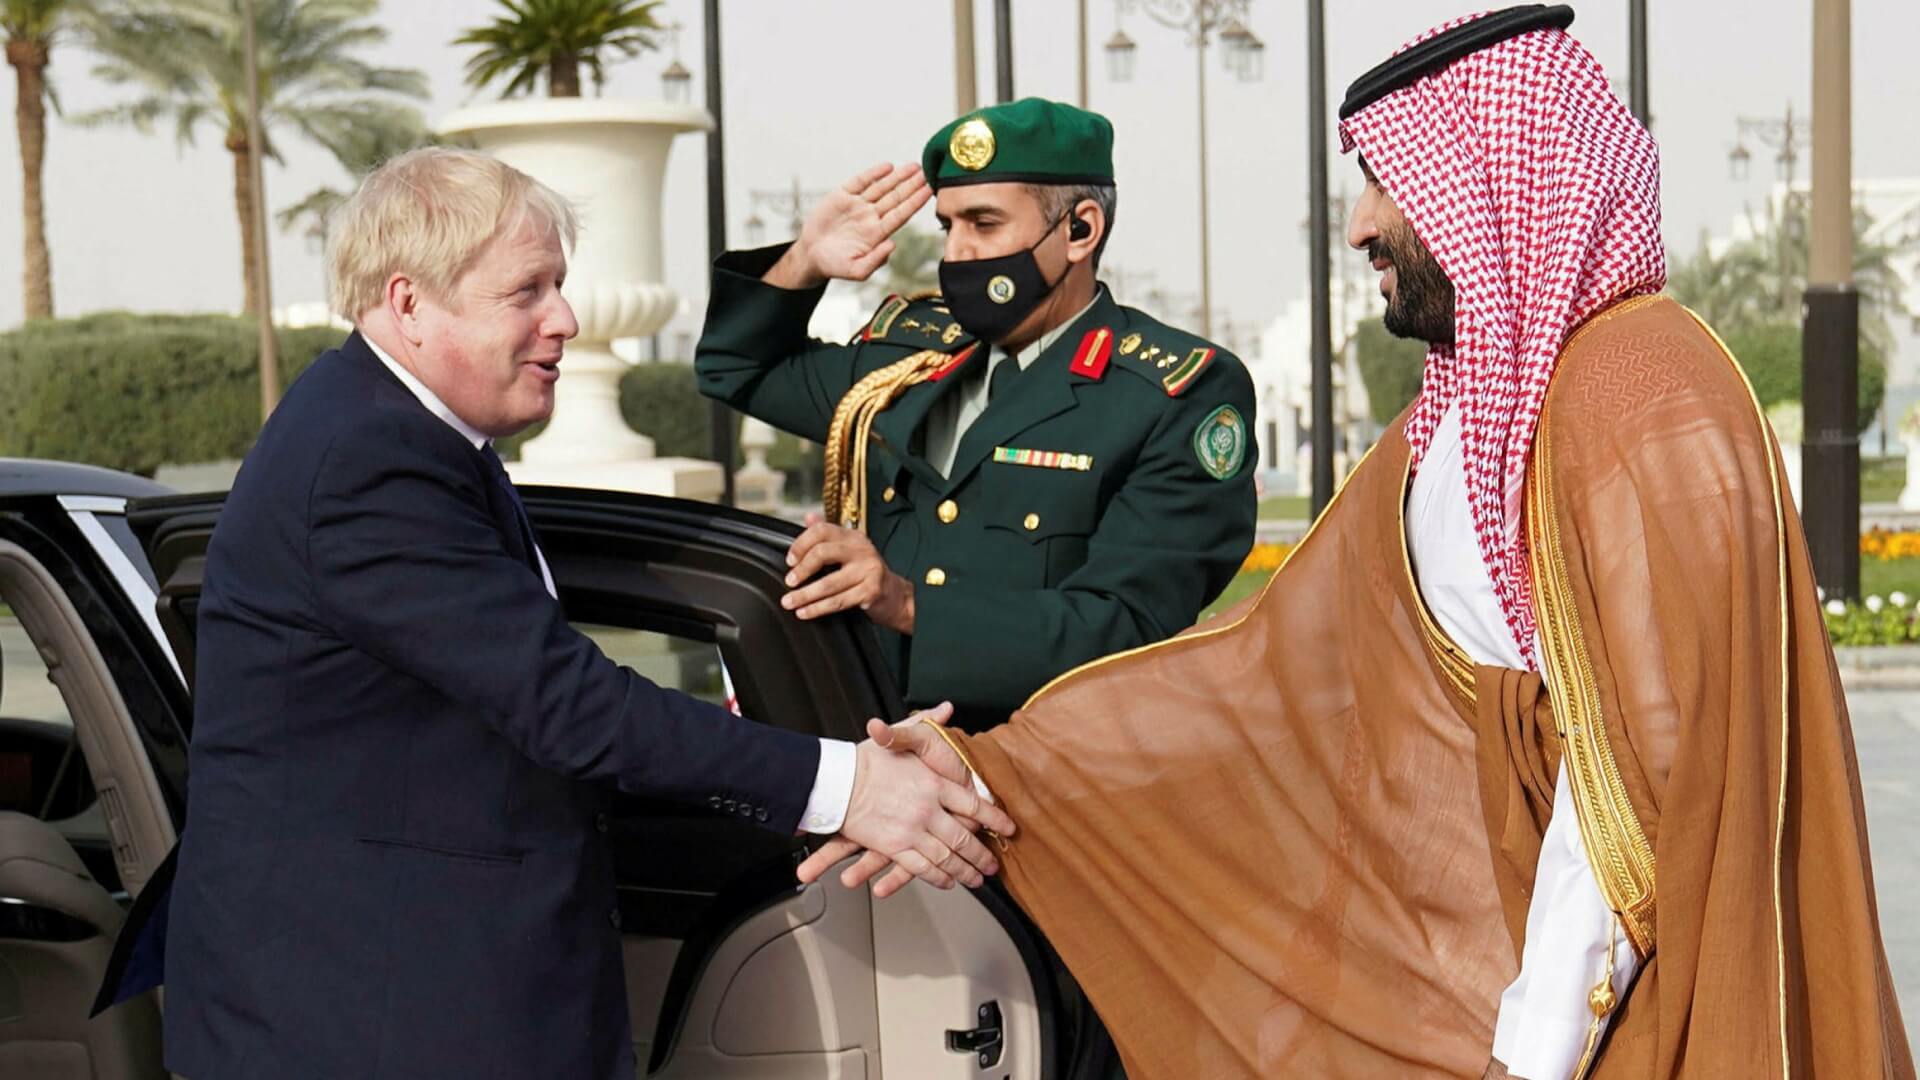 UK PM Johnson Ignores Mass Executions During Saudi Arabia Trip, Focuses on Oil Ties